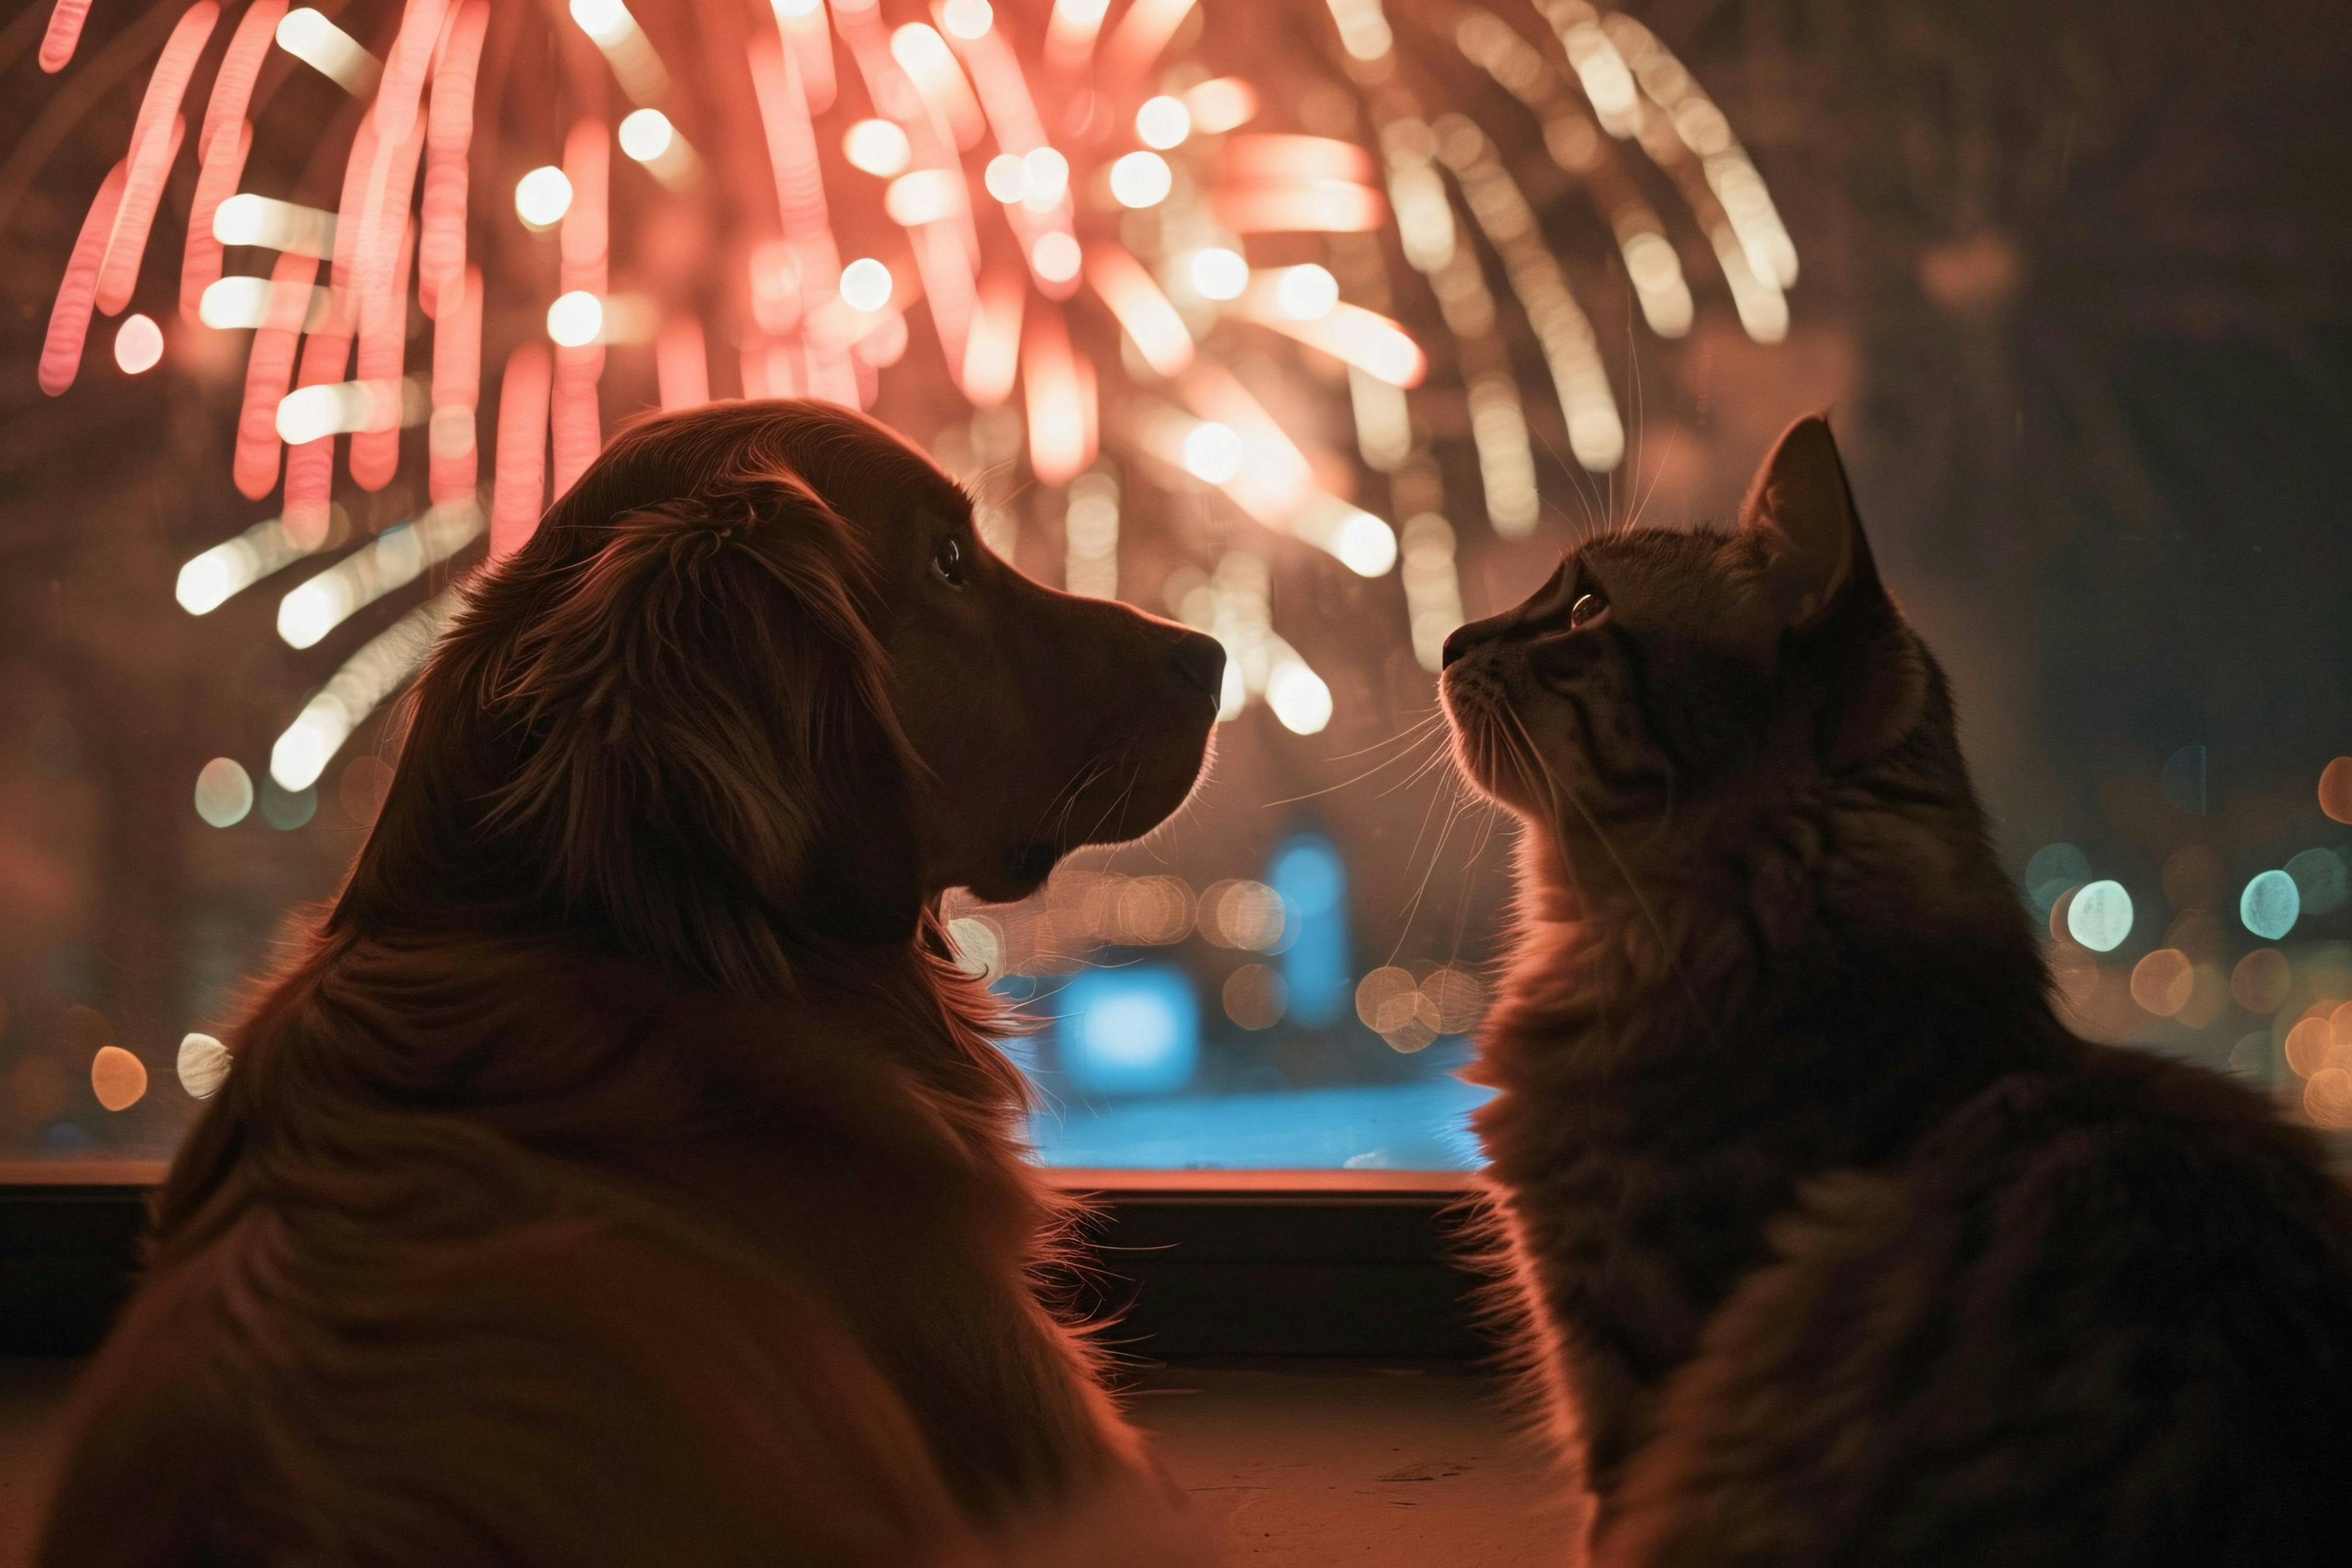 Preparing for July 4th: The day the greatest number of pets go missing